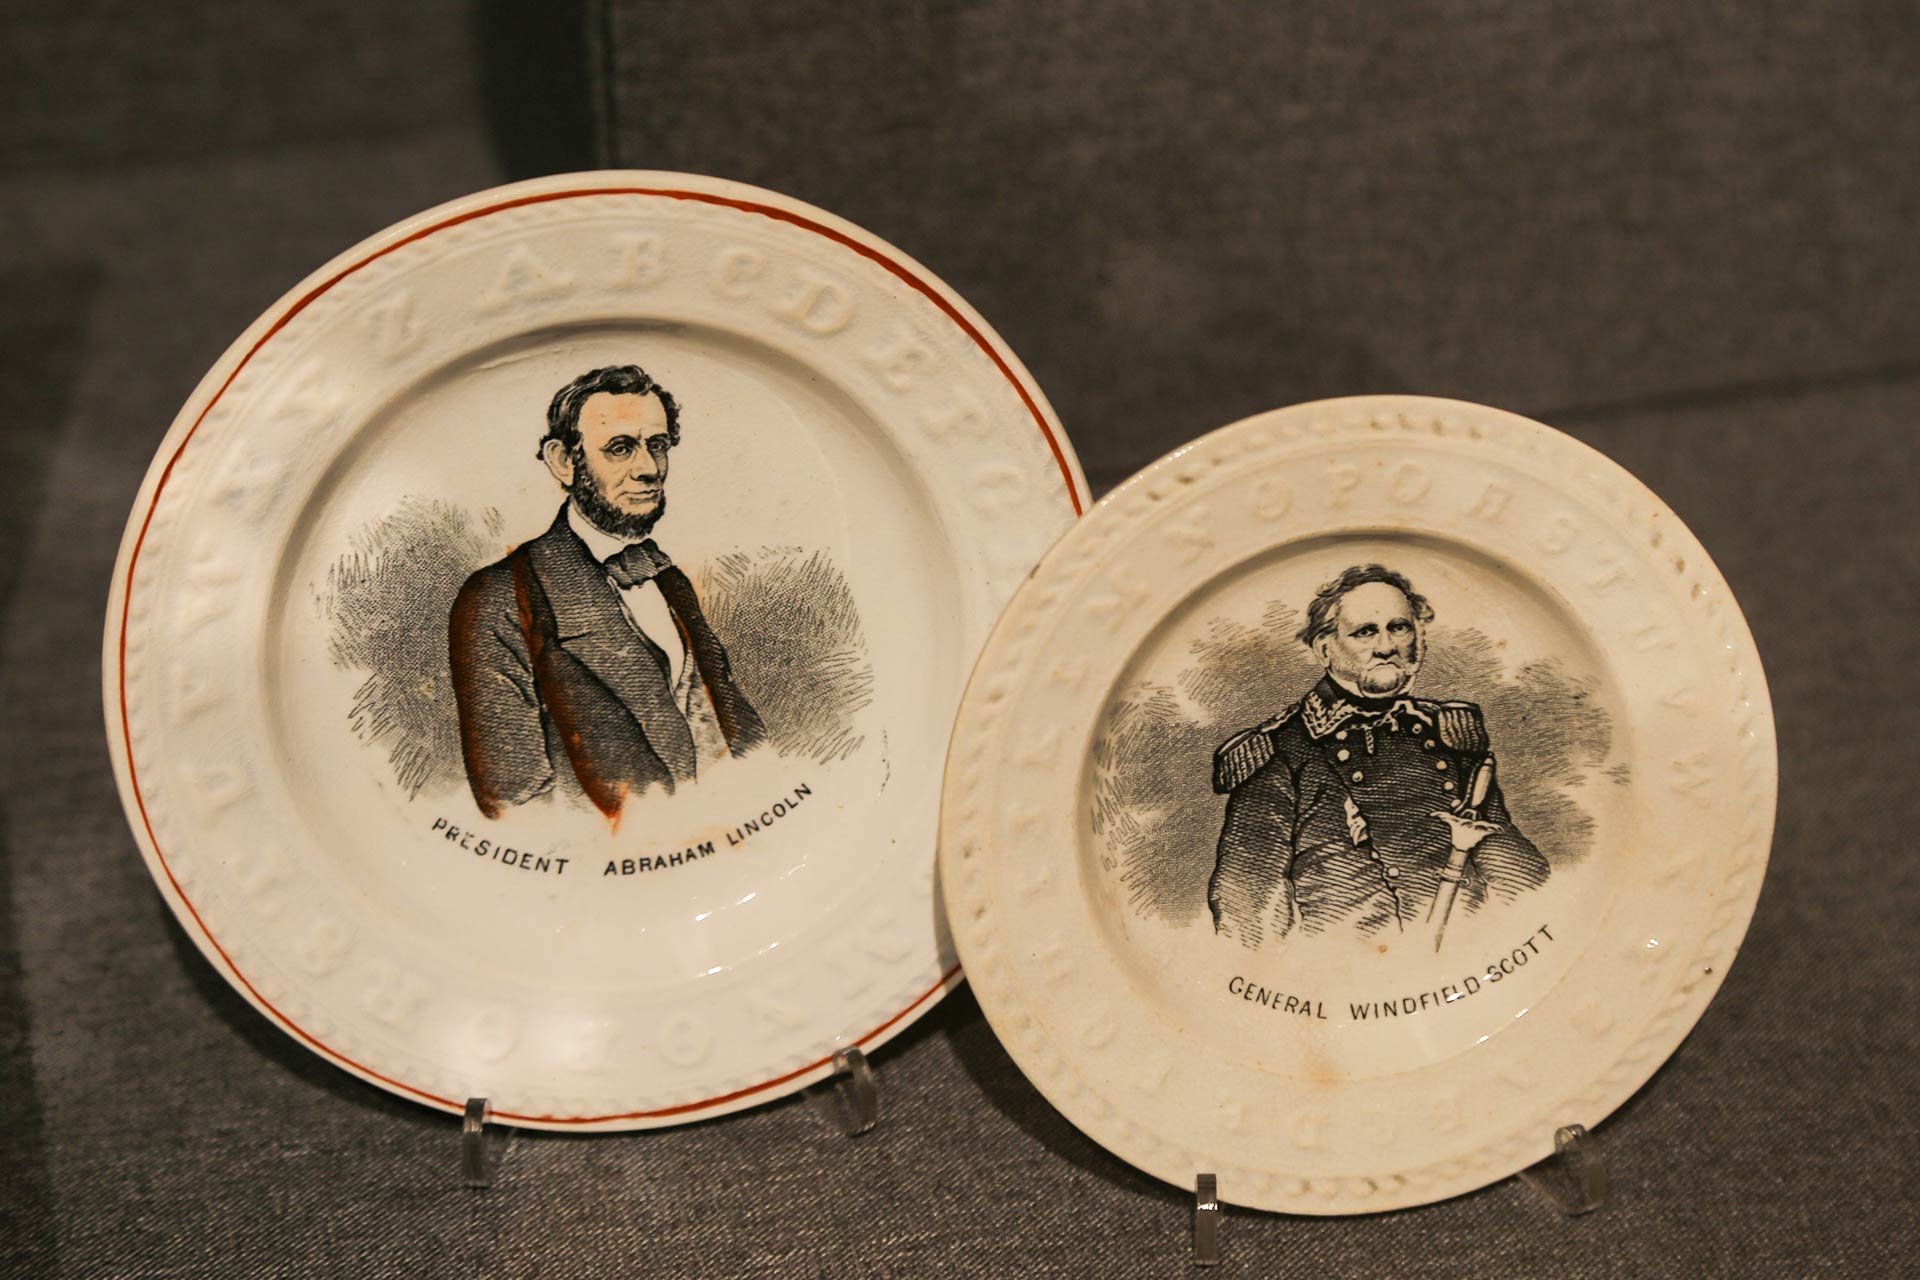 plates with the images of Abraham Lincoln and General Windfield Scott